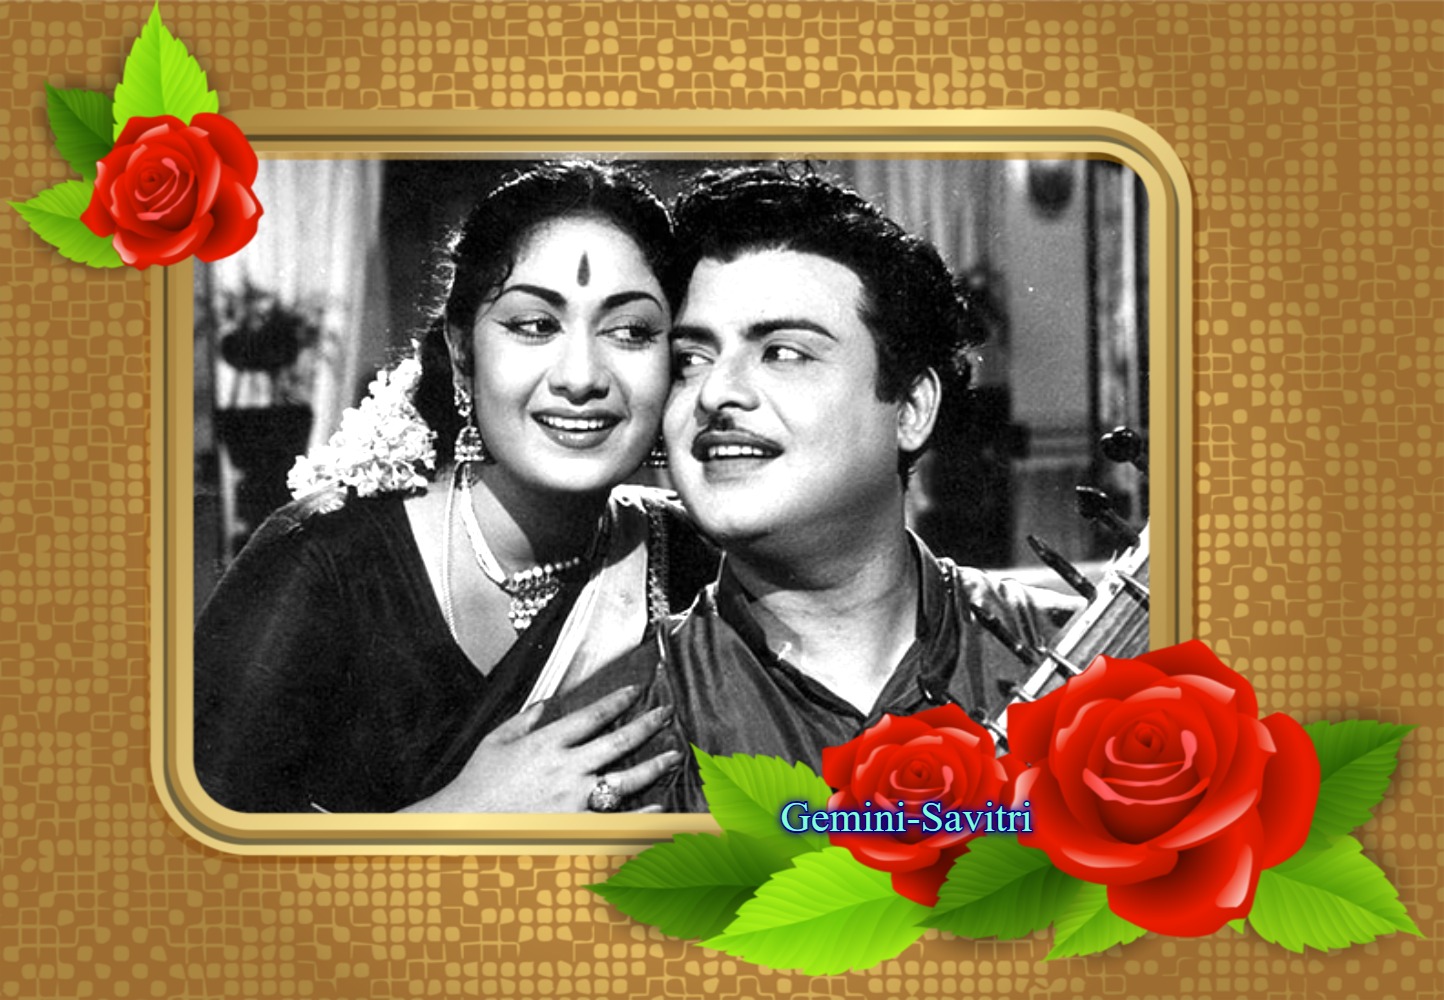 You are currently viewing “King of Romance-Gemini Ganesan Remembered”